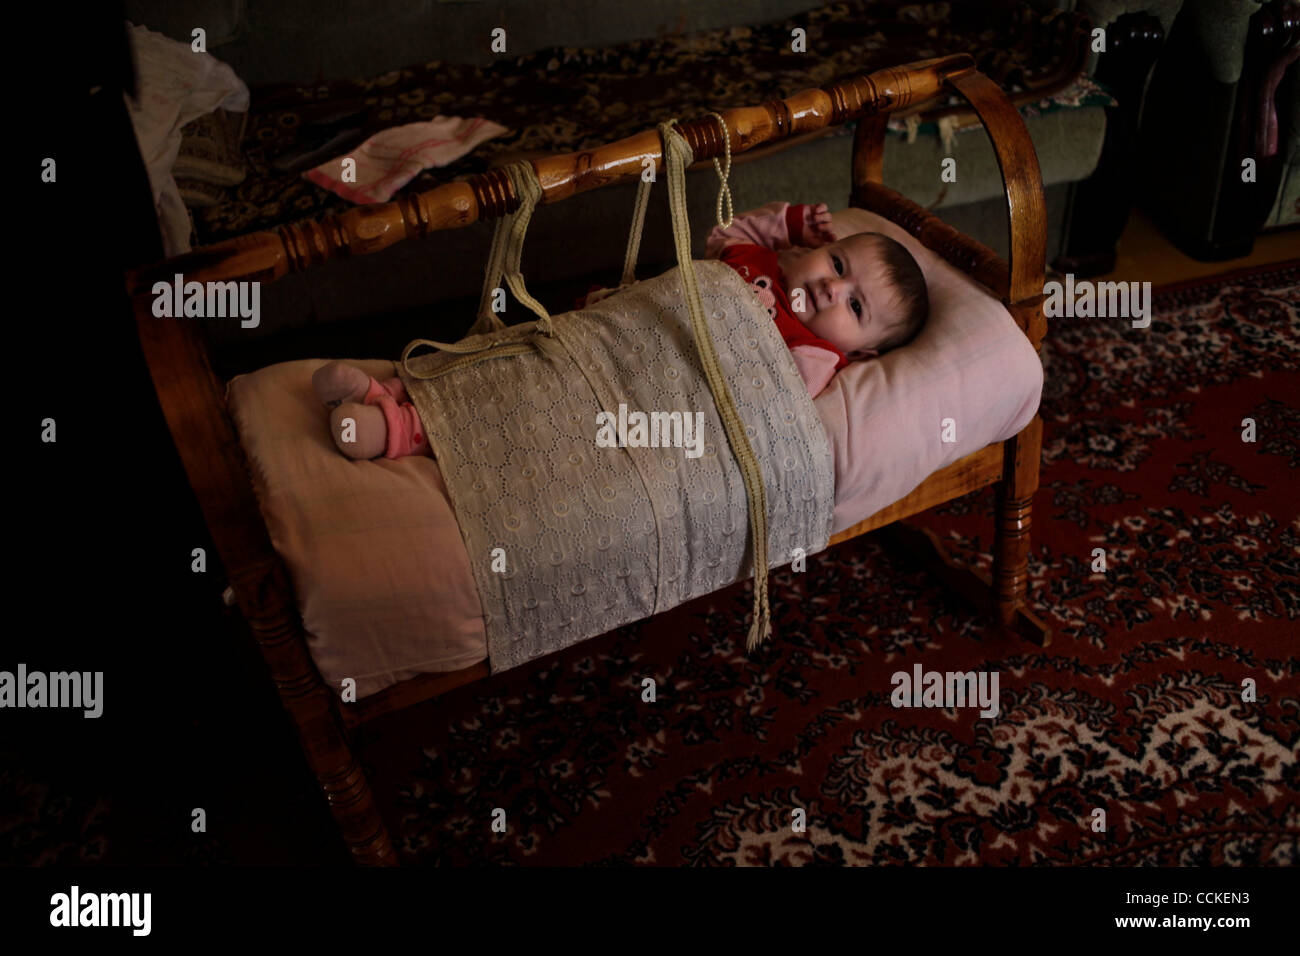 Nov 24, 2010 - Dagestan, Russia - A Dagestani baby, who is now considered an orphan after her father was killed, rests in traditional Dagestani baby bed, known as an 'aga.'  The Republic of Dagestan is a federal subject of Russia, located in the North Caucasus region. It has been a scene of low-leve Stock Photo